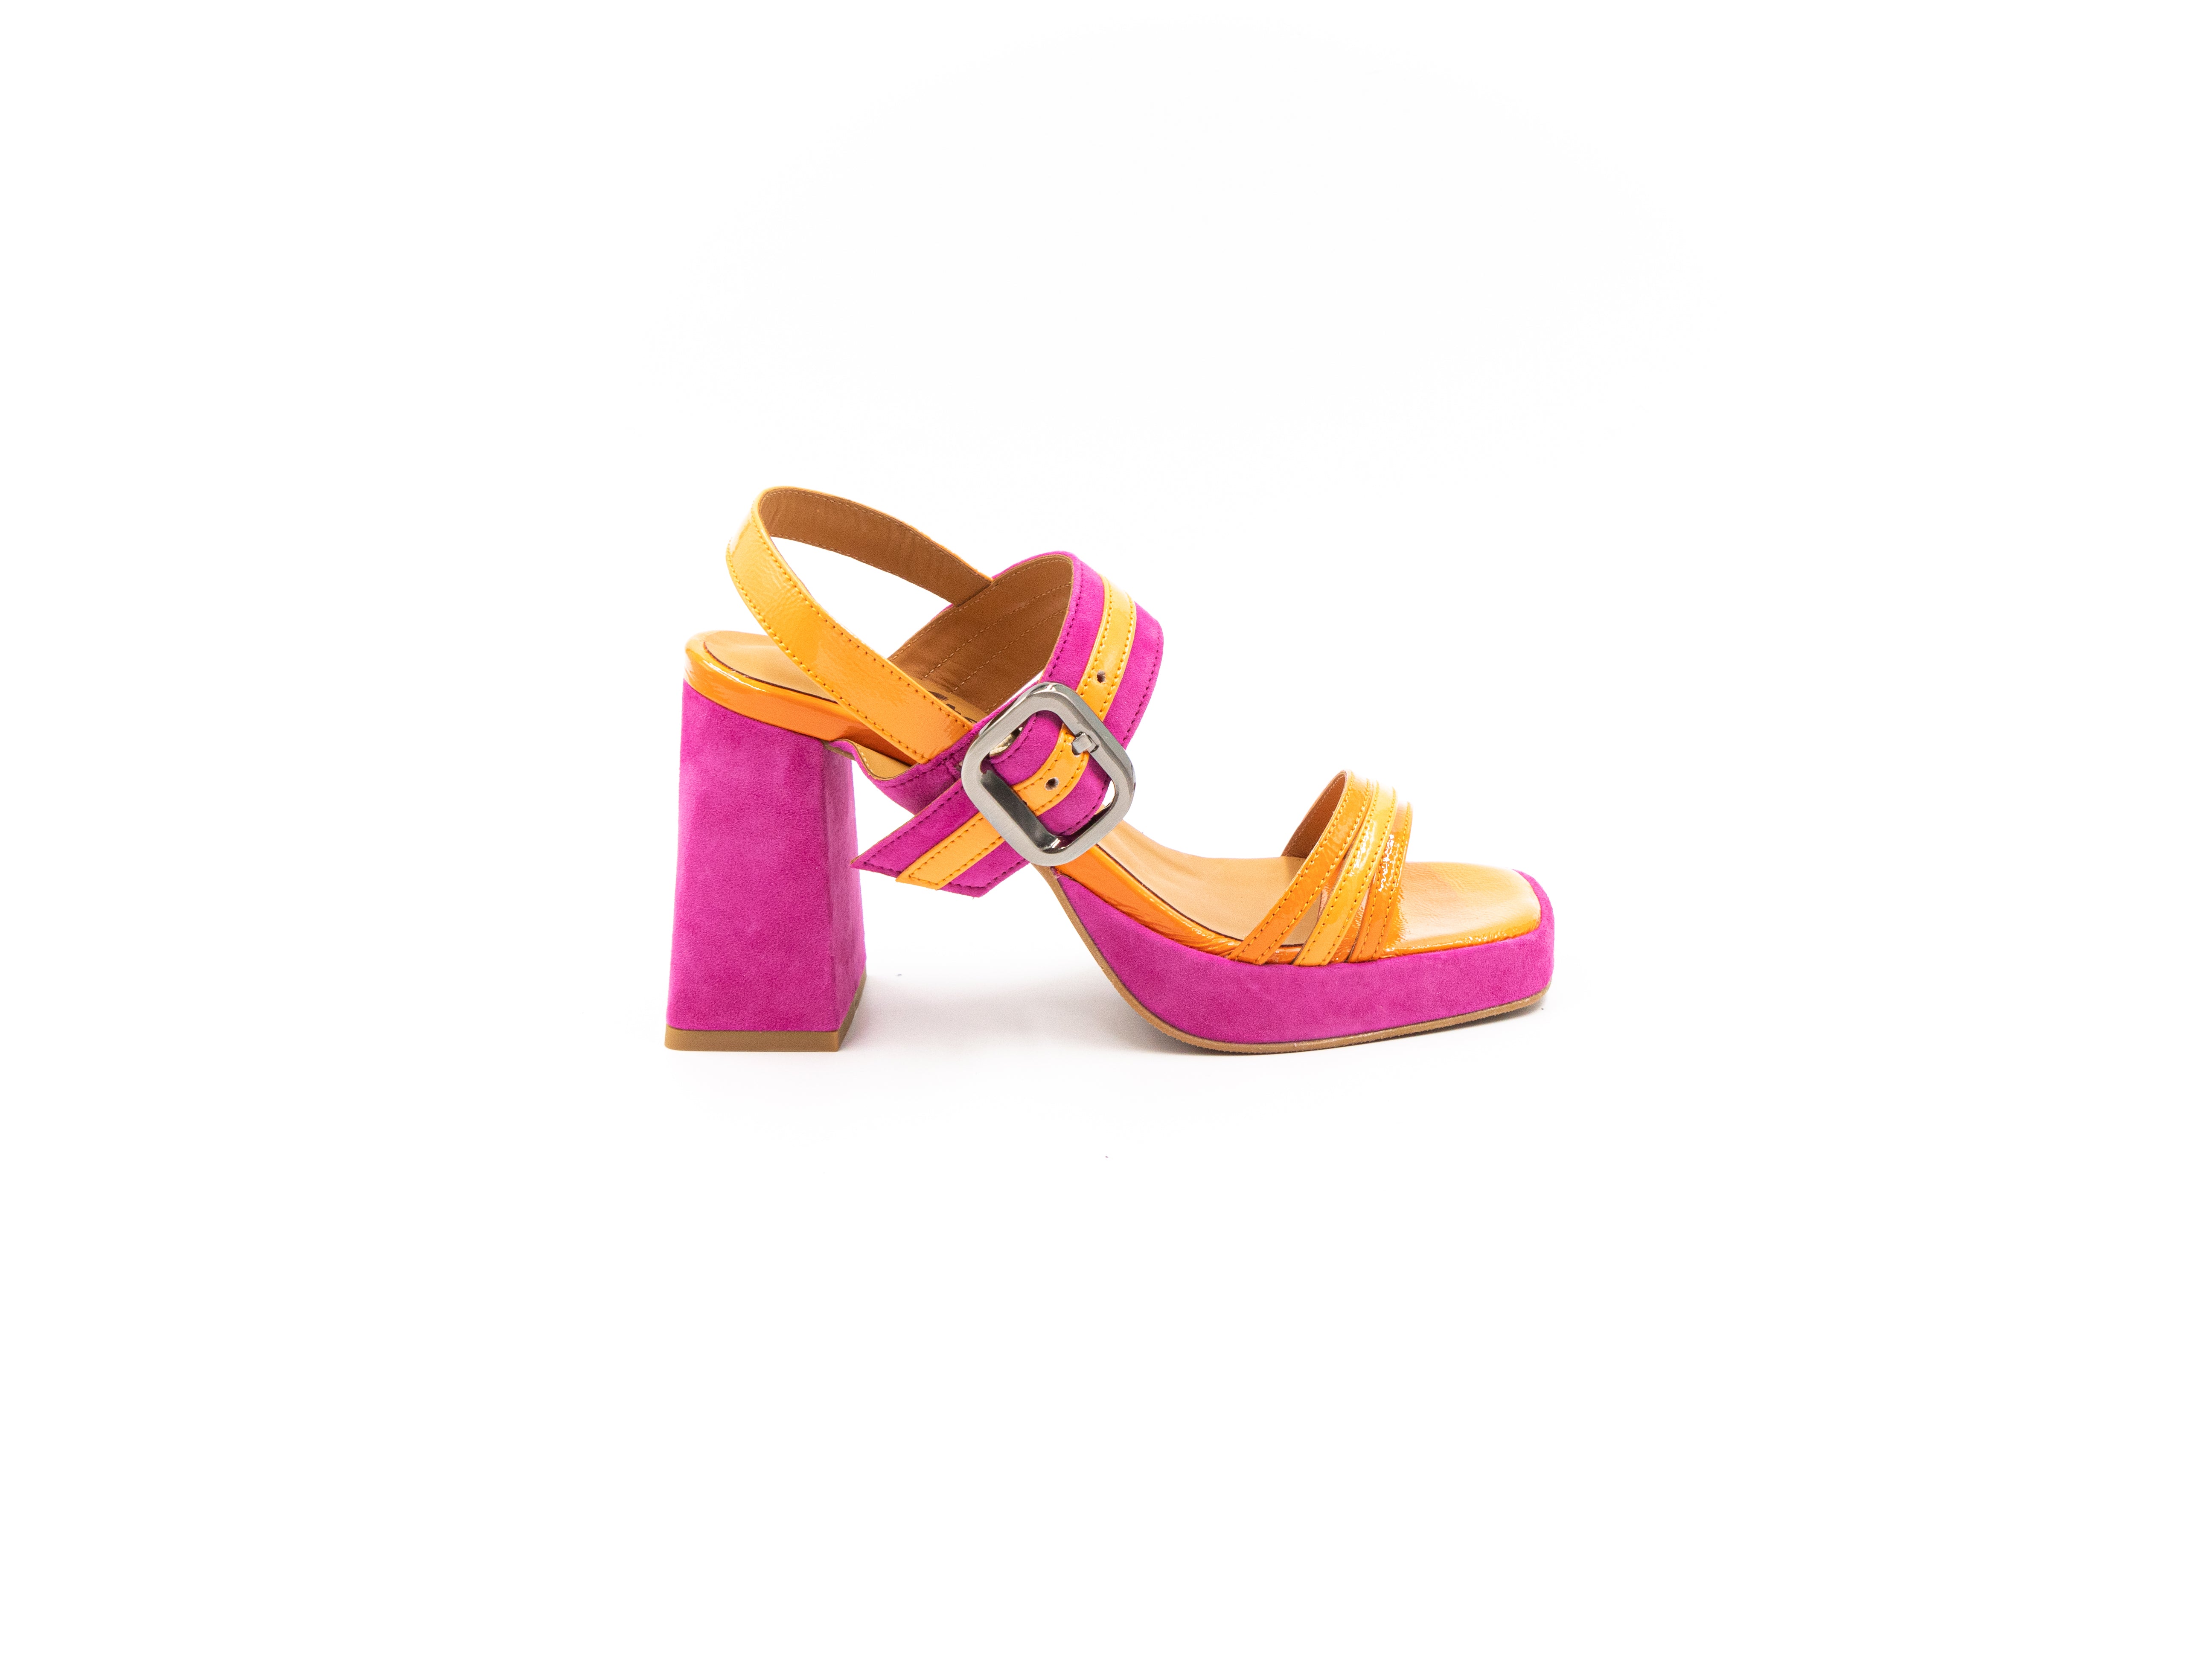 Heeled sandals in orange and pink.